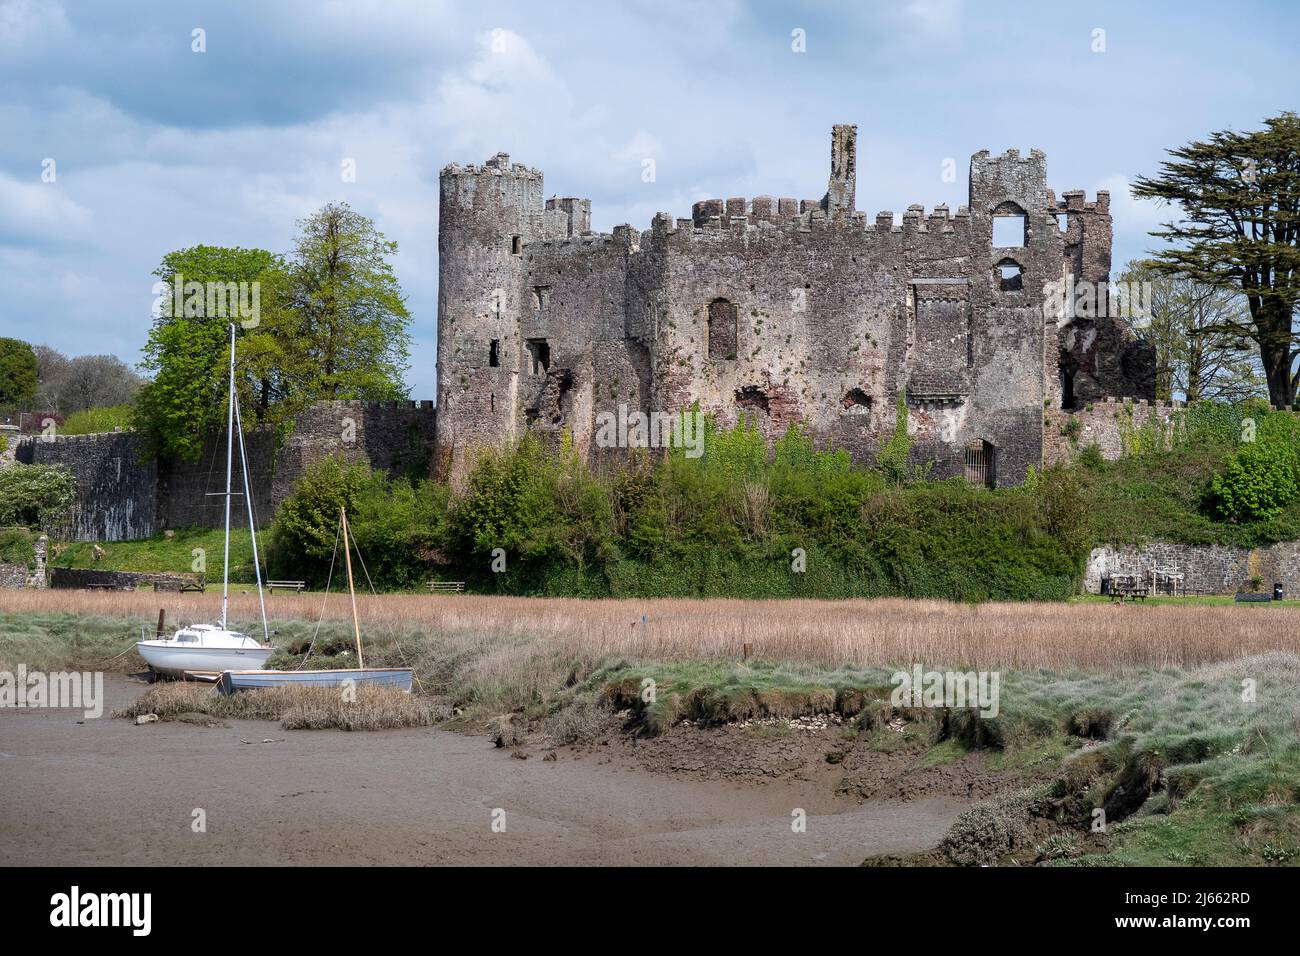 Laugharne Castle in Laugharne, Carmarthenshire, Wales. Stock Photo